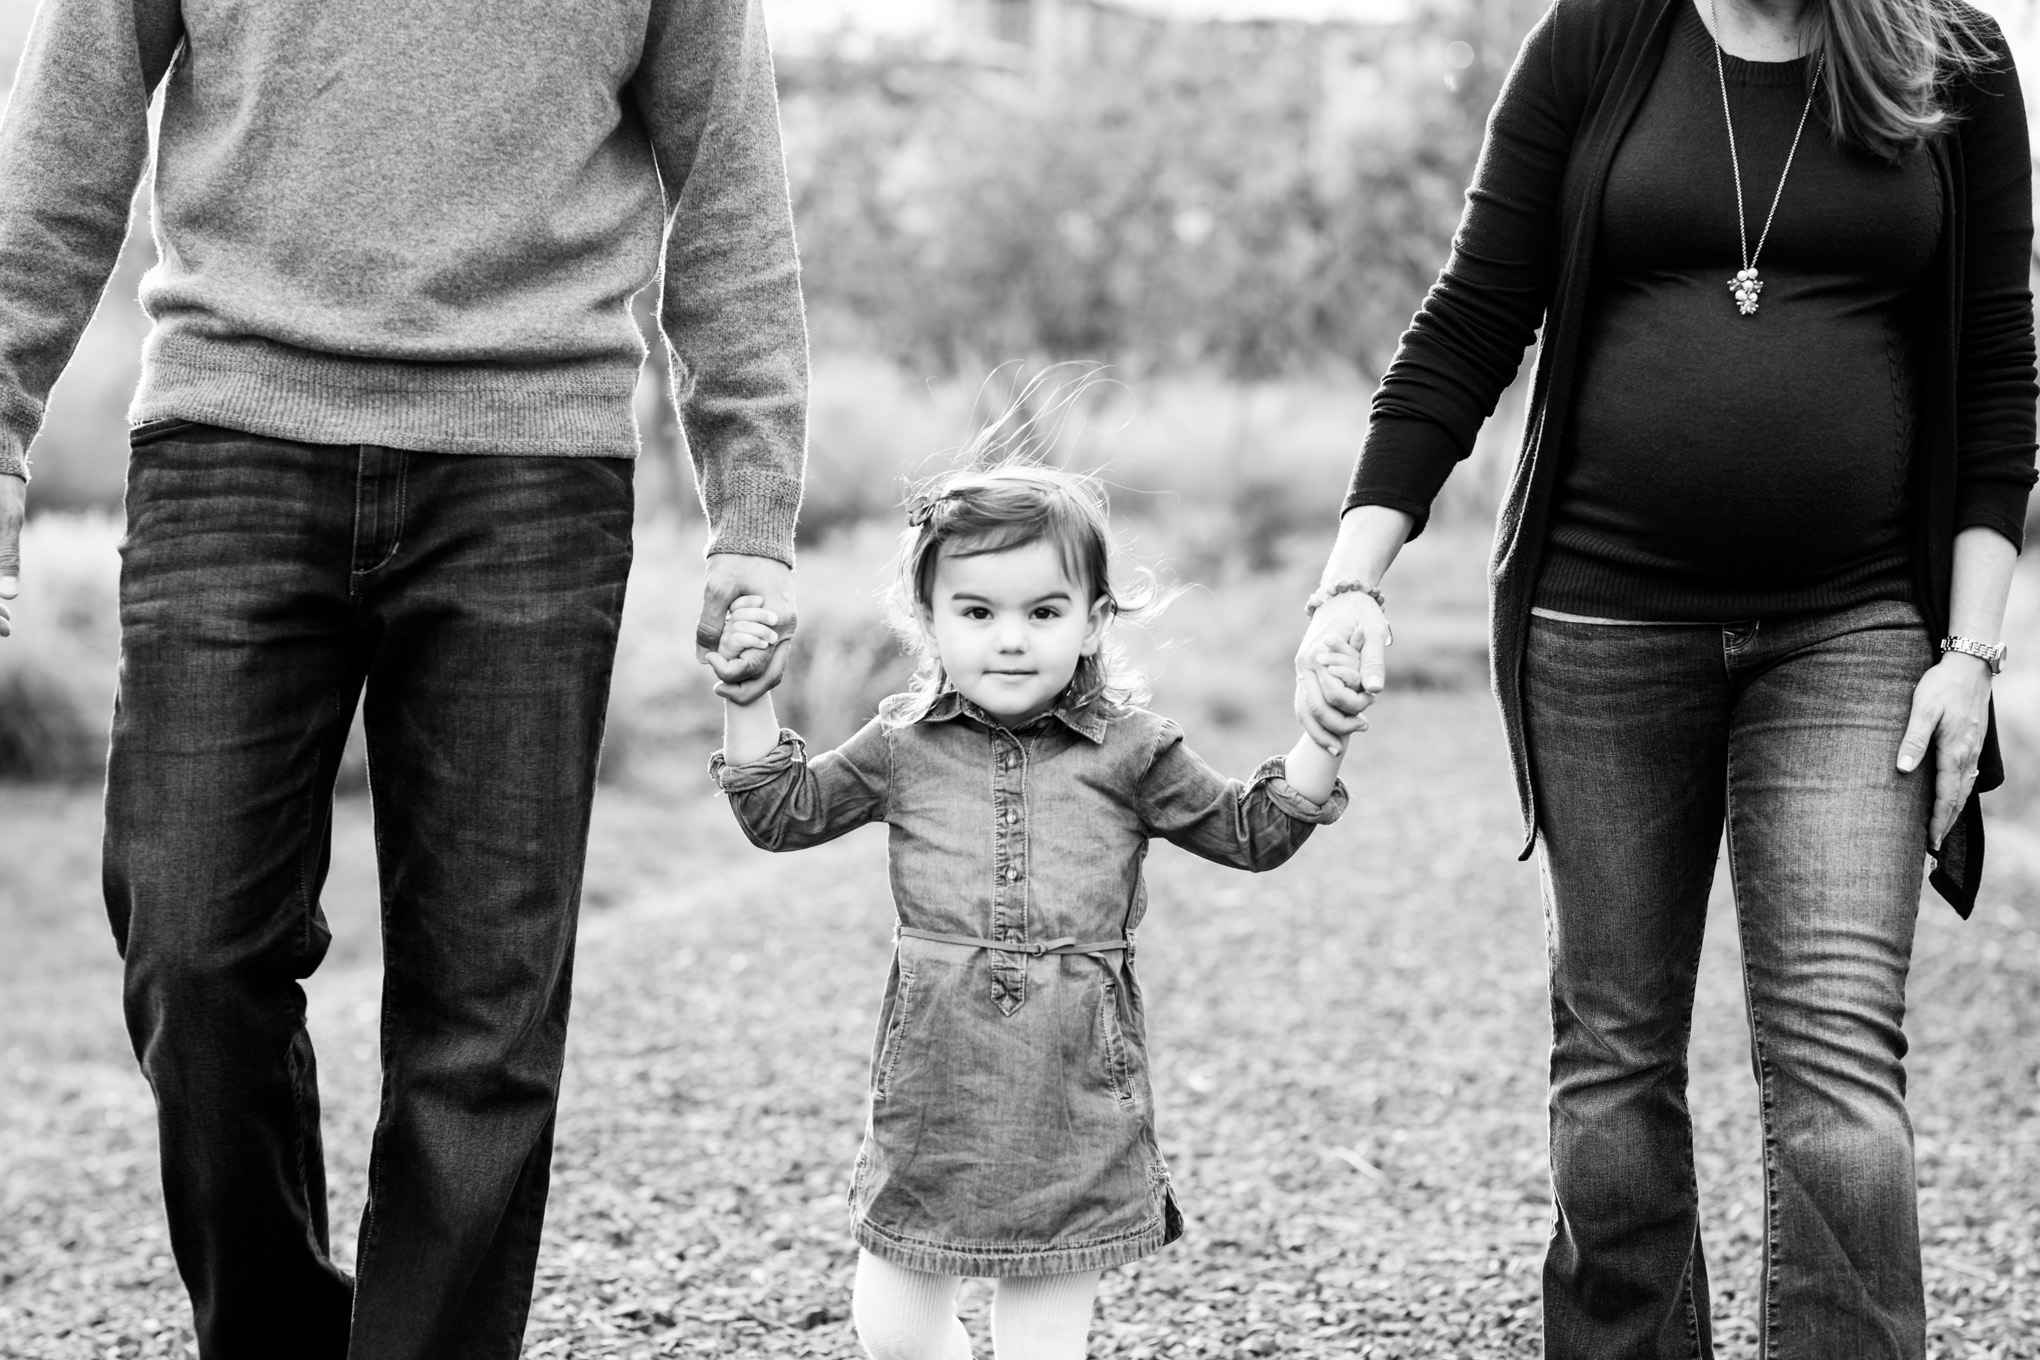 long bridge park family photos, family of three, toddler, little girl, baby bump, maternity photos, outdoor photos, holiday portraits, family portraits, northern Virginia, magic hour portraits, black and white photography